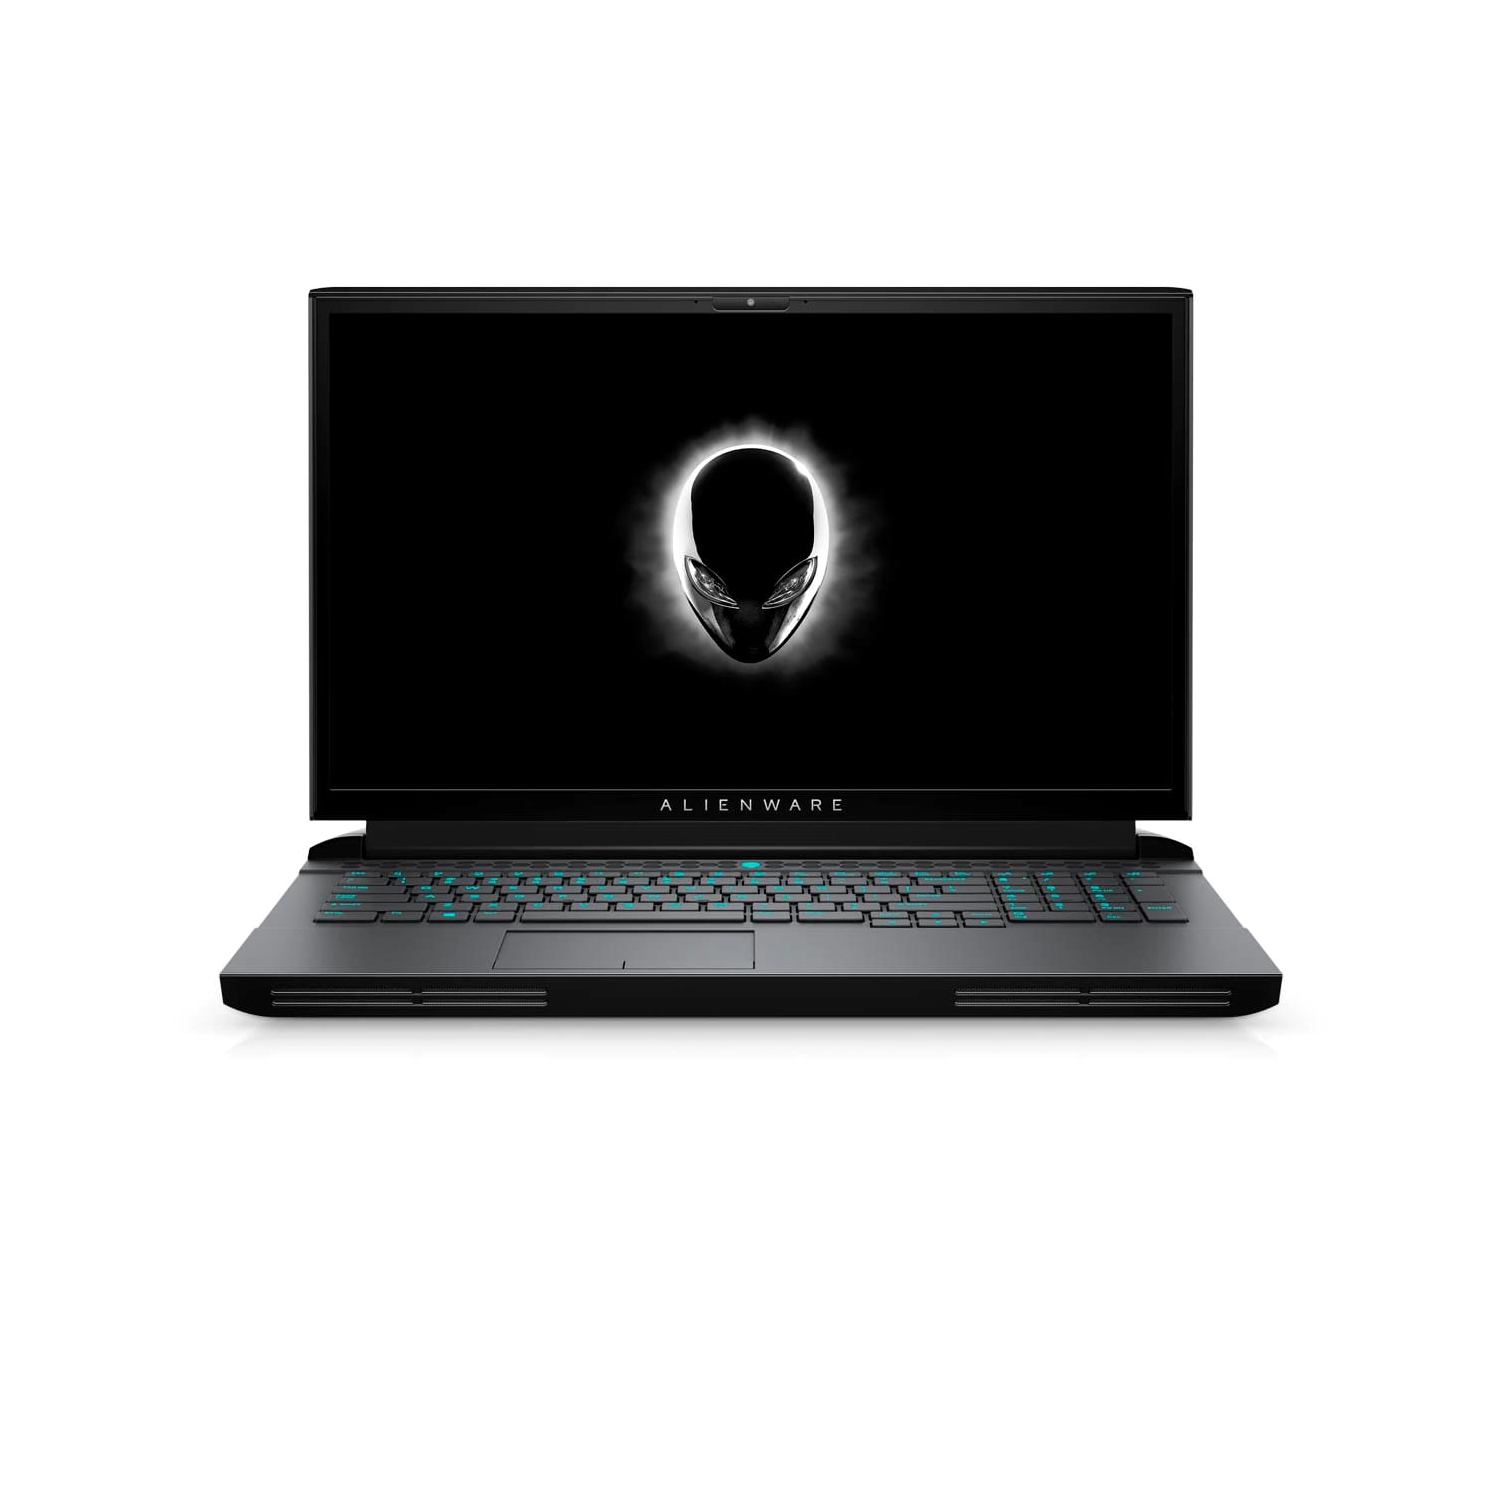 Refurbished (Excellent) - Dell Alienware 17 51m R2 Gaming Laptop (2020), 17.3" FHD, Core i7, 256GB SSD + 256GB SSD, 32GB RAM, RTX 2060, 4.8 GHz, 10th Gen CPU Certified